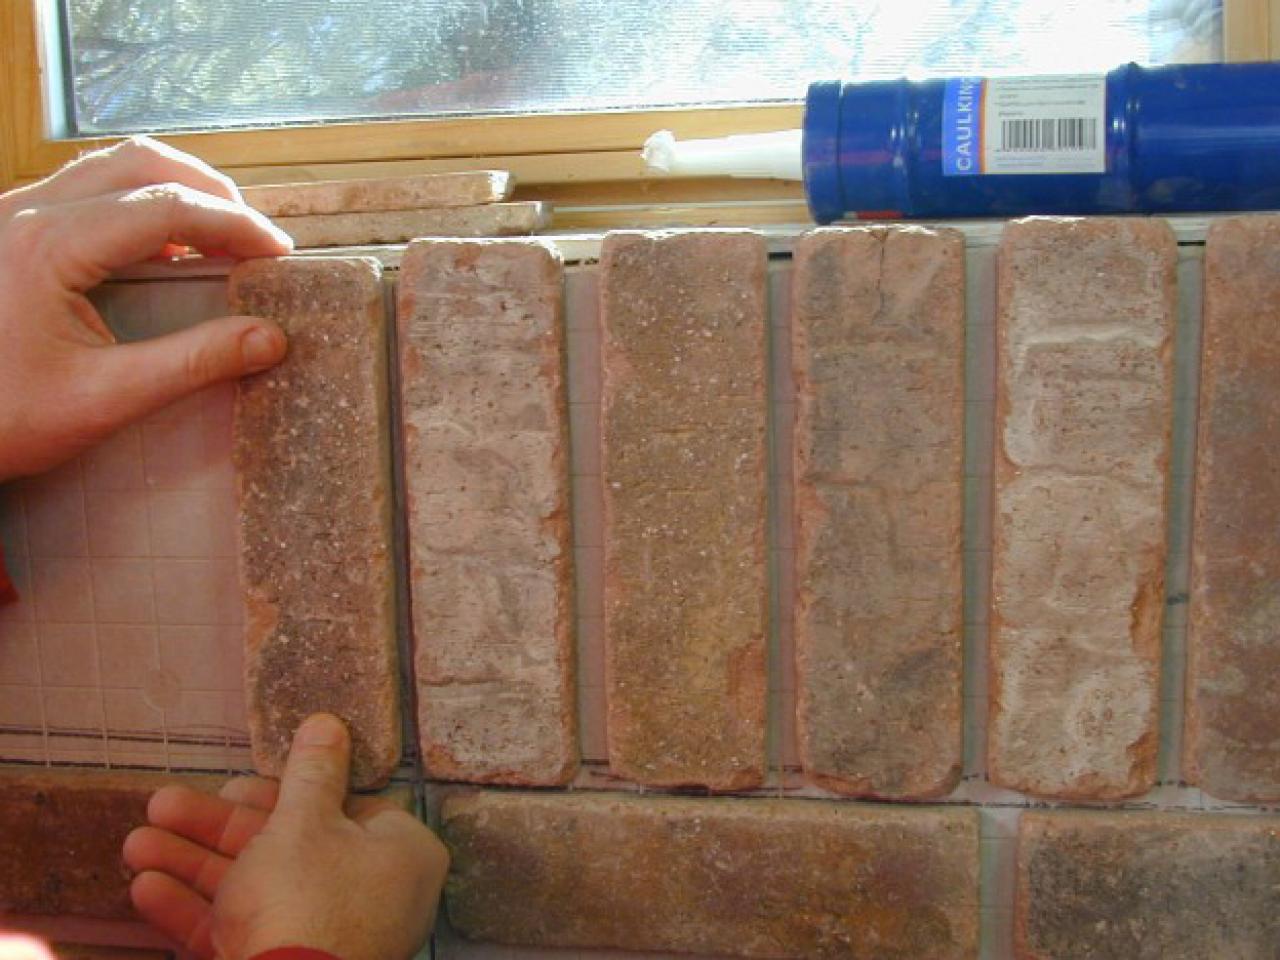 Follow these instructions from the DIYNetwork.com professionals to attach a brick veneer pattern to an interior wall.